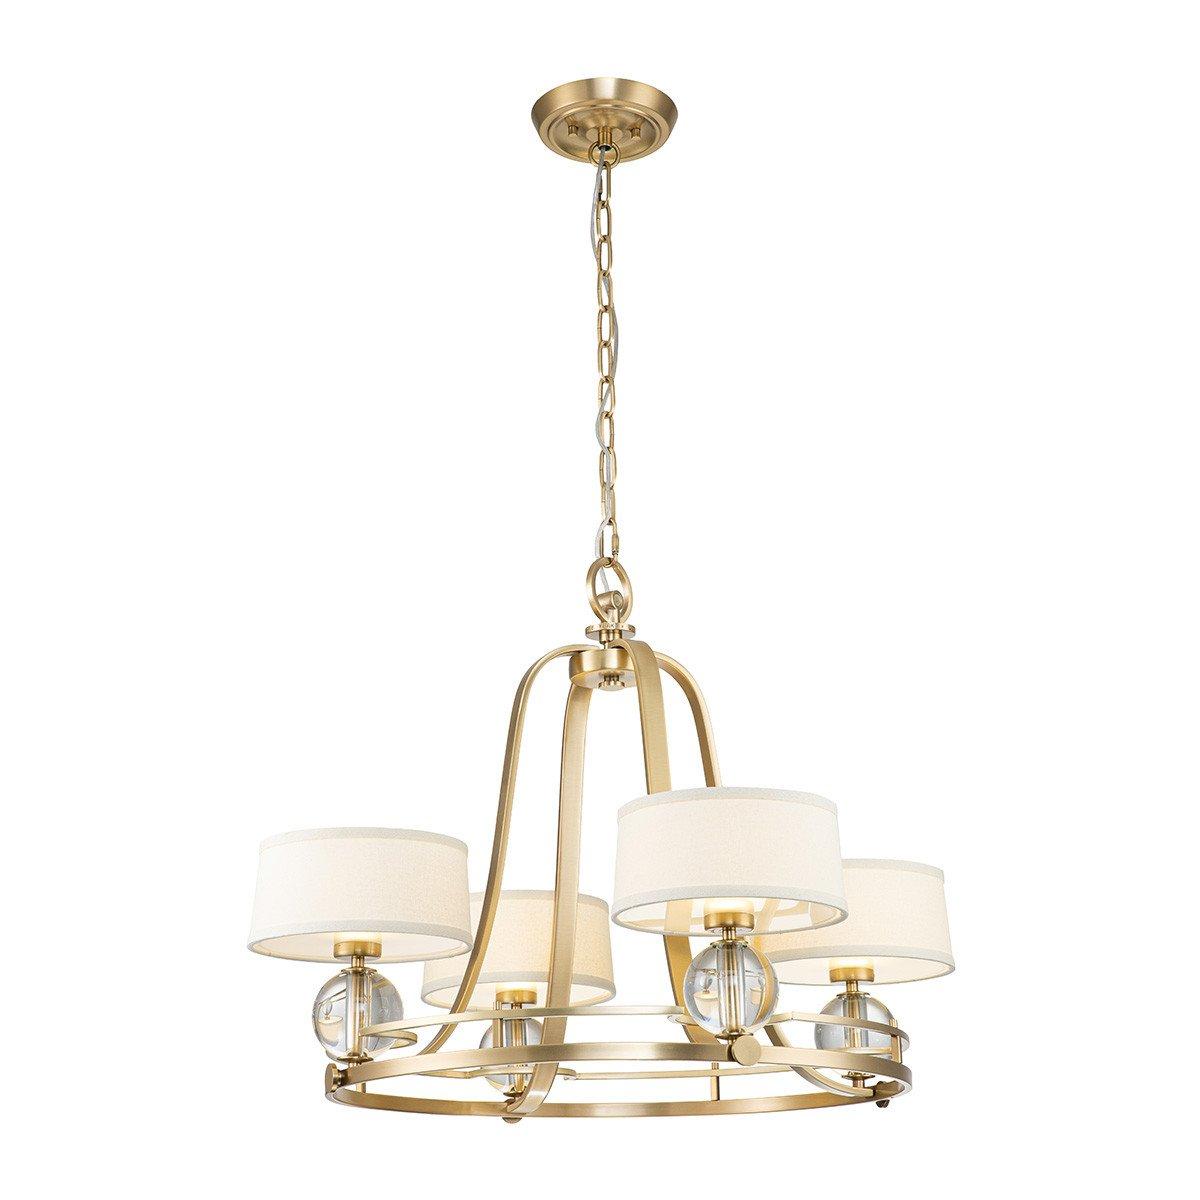 Quoizel Gotham Multi Arm Chandelier with Shades Brushed Brass